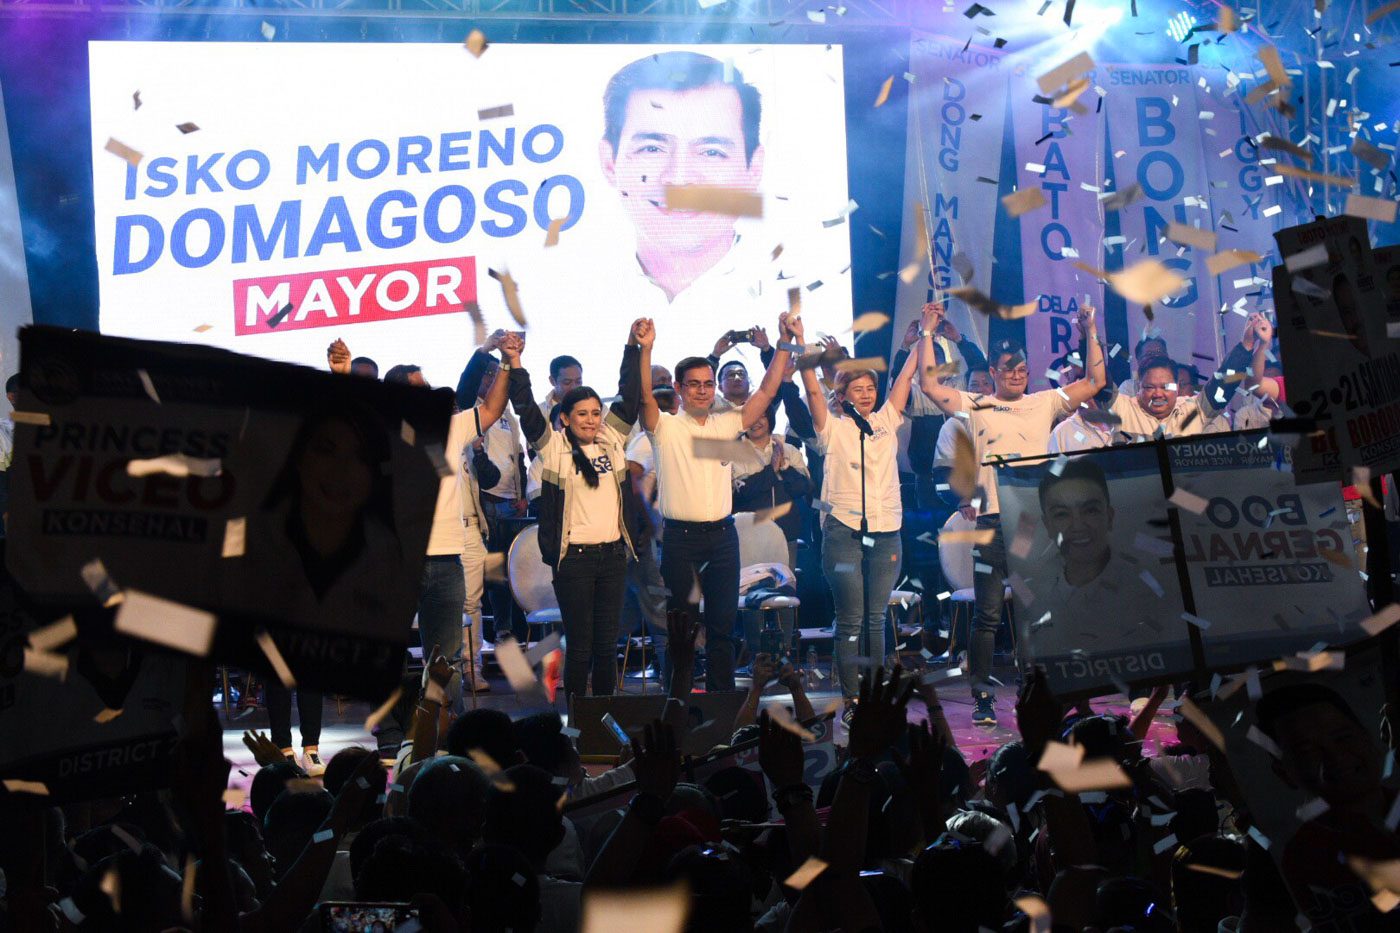 LOCAL CONTROL. Isko Moreno runs with the Manila-based political party Asenso Manileño, which enjoys grassroots support from Manila's local leaders. Photo by Alecs Ongcal/Rappler  